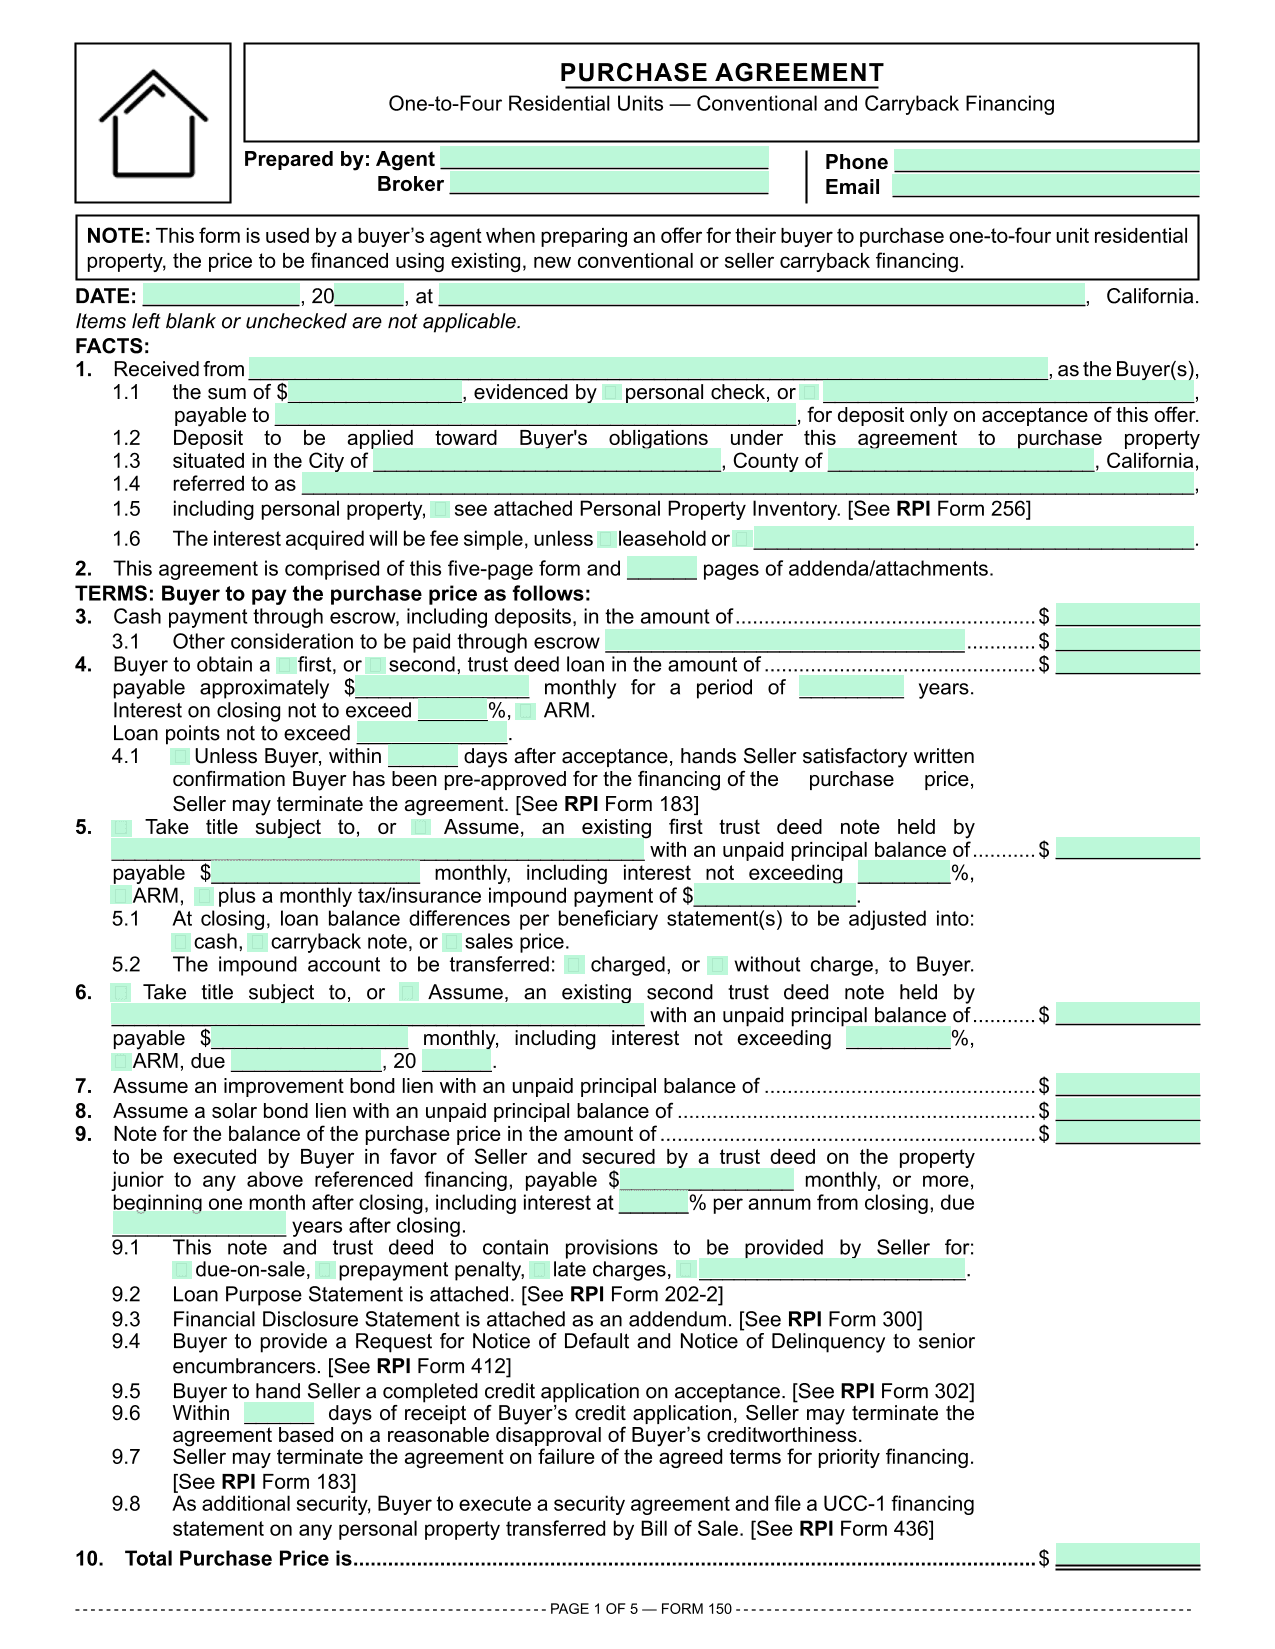 Residential Purchase Agreement (RPI 150) screenshot